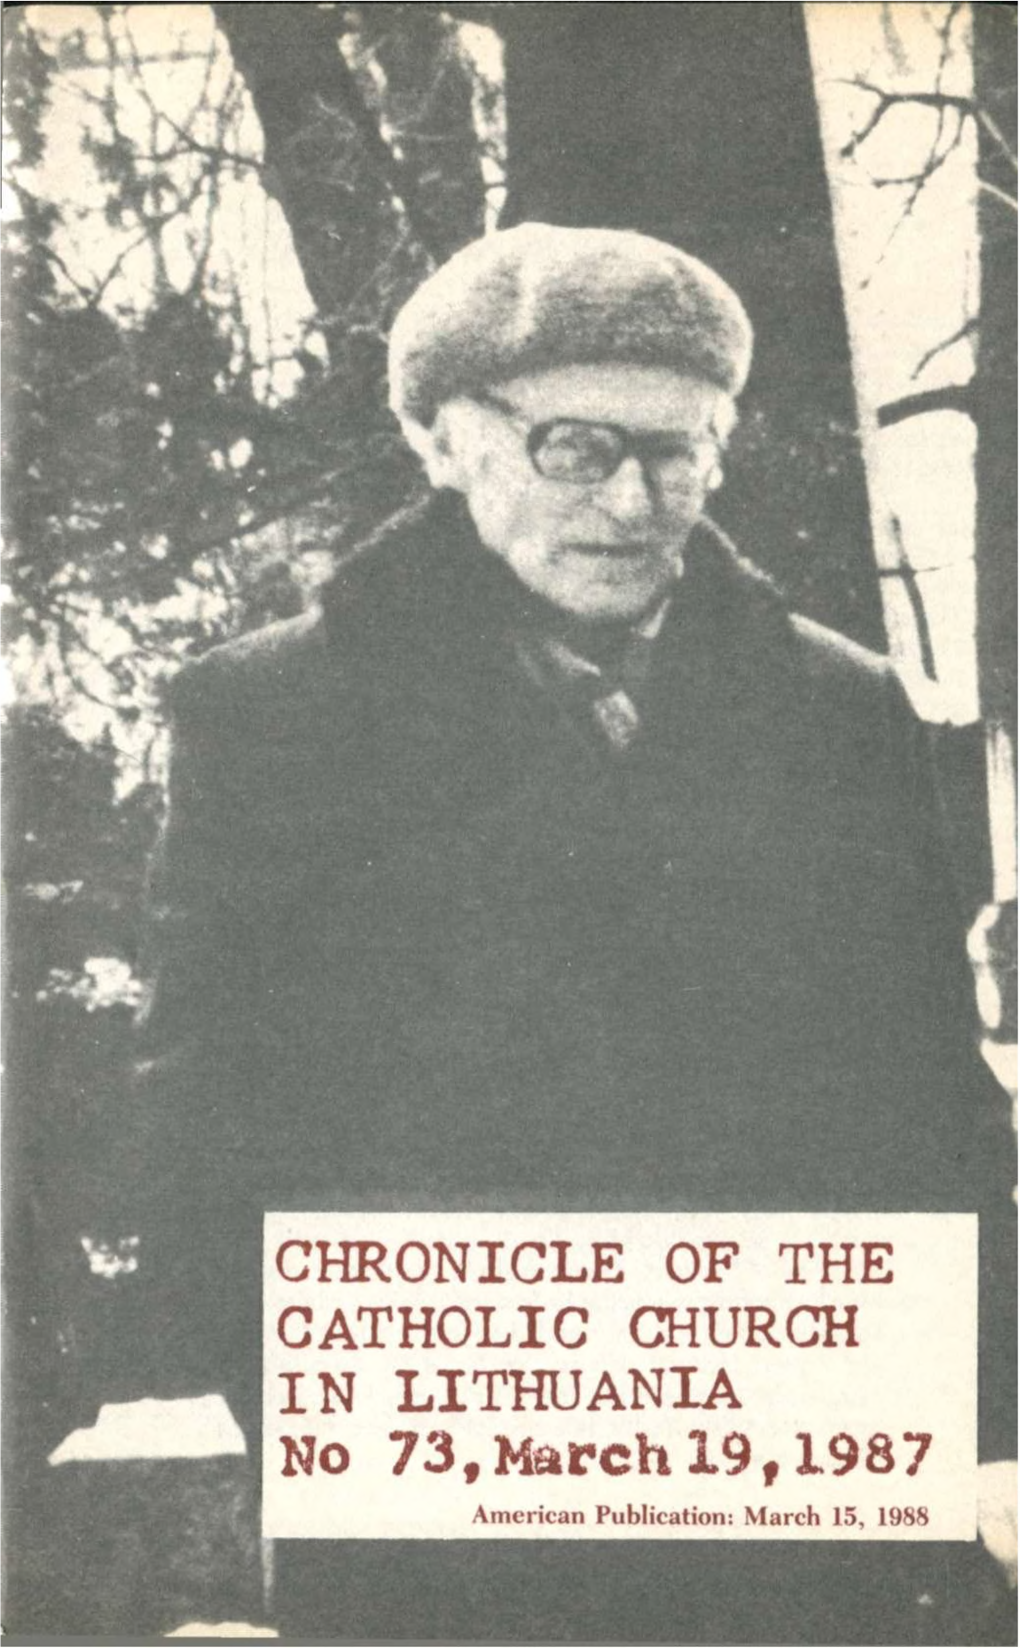 CHRONICLE of the CATHOLIC CHURCH in LITHUANIA No 73,March 19,1987 American Publication: March 15, 1988 CHRONICLE of the CATHOLIC CHURCH in LITHUANIA No